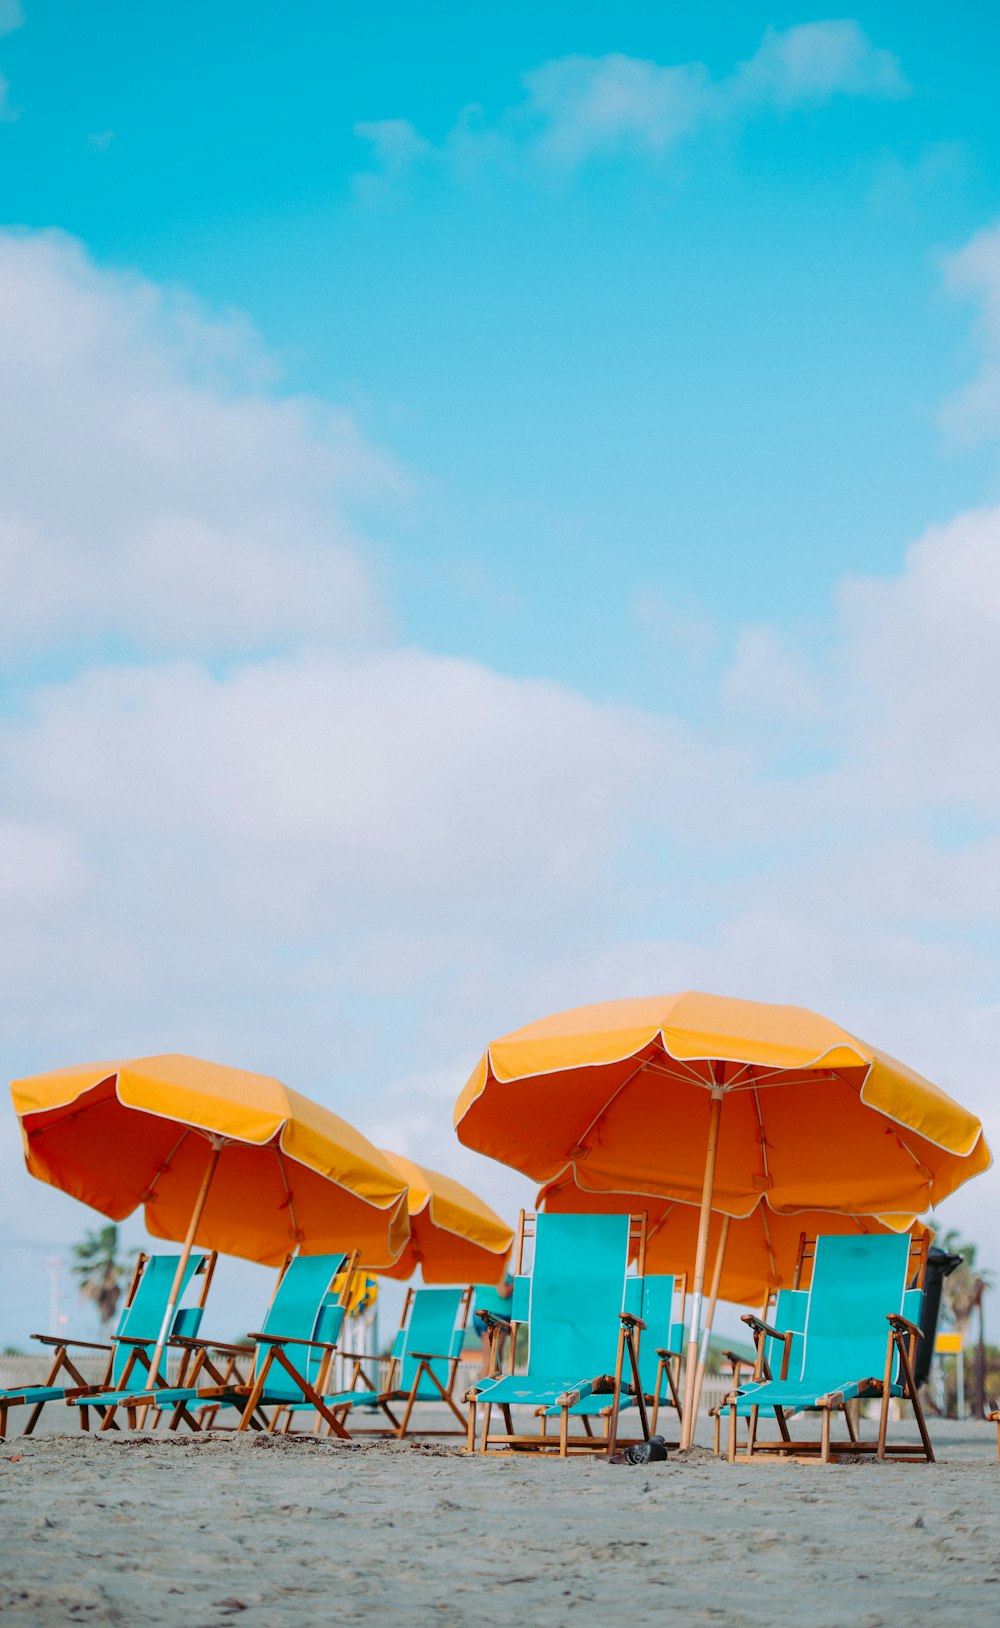 closeup photo of lounger chairs and beach umbrellas